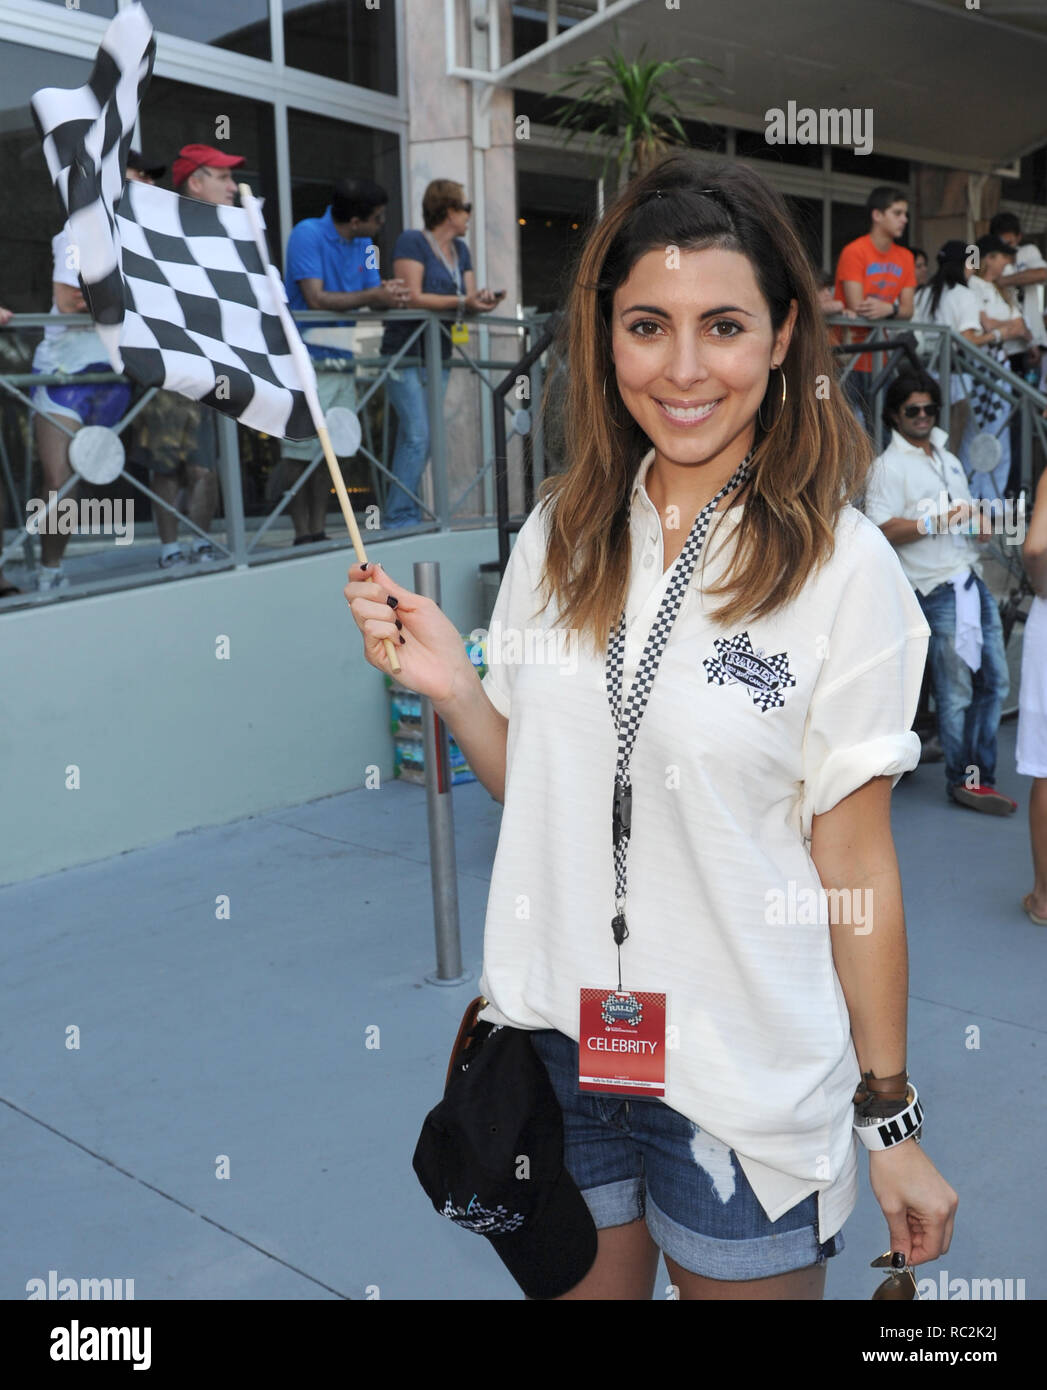 MIAMI, FL - APRIL 30: (EXCLUSIVE COVERAGE) Actress Jamie-Lynn Sigler participates in a Rally for Kids with Cancer Scavenger Cup.  Jamie-Lynn Sigler (formerly DiScala; born May 15, 1981) is an American actress and singer. She is best known for her role as Meadow Soprano on the HBO television series The Sopranos.  on April 30, 2011 in Miami, Florida.      People:   Jamie-Lynn Sigler  Credit: Hoo-Me.com/MediaPunch Stock Photo